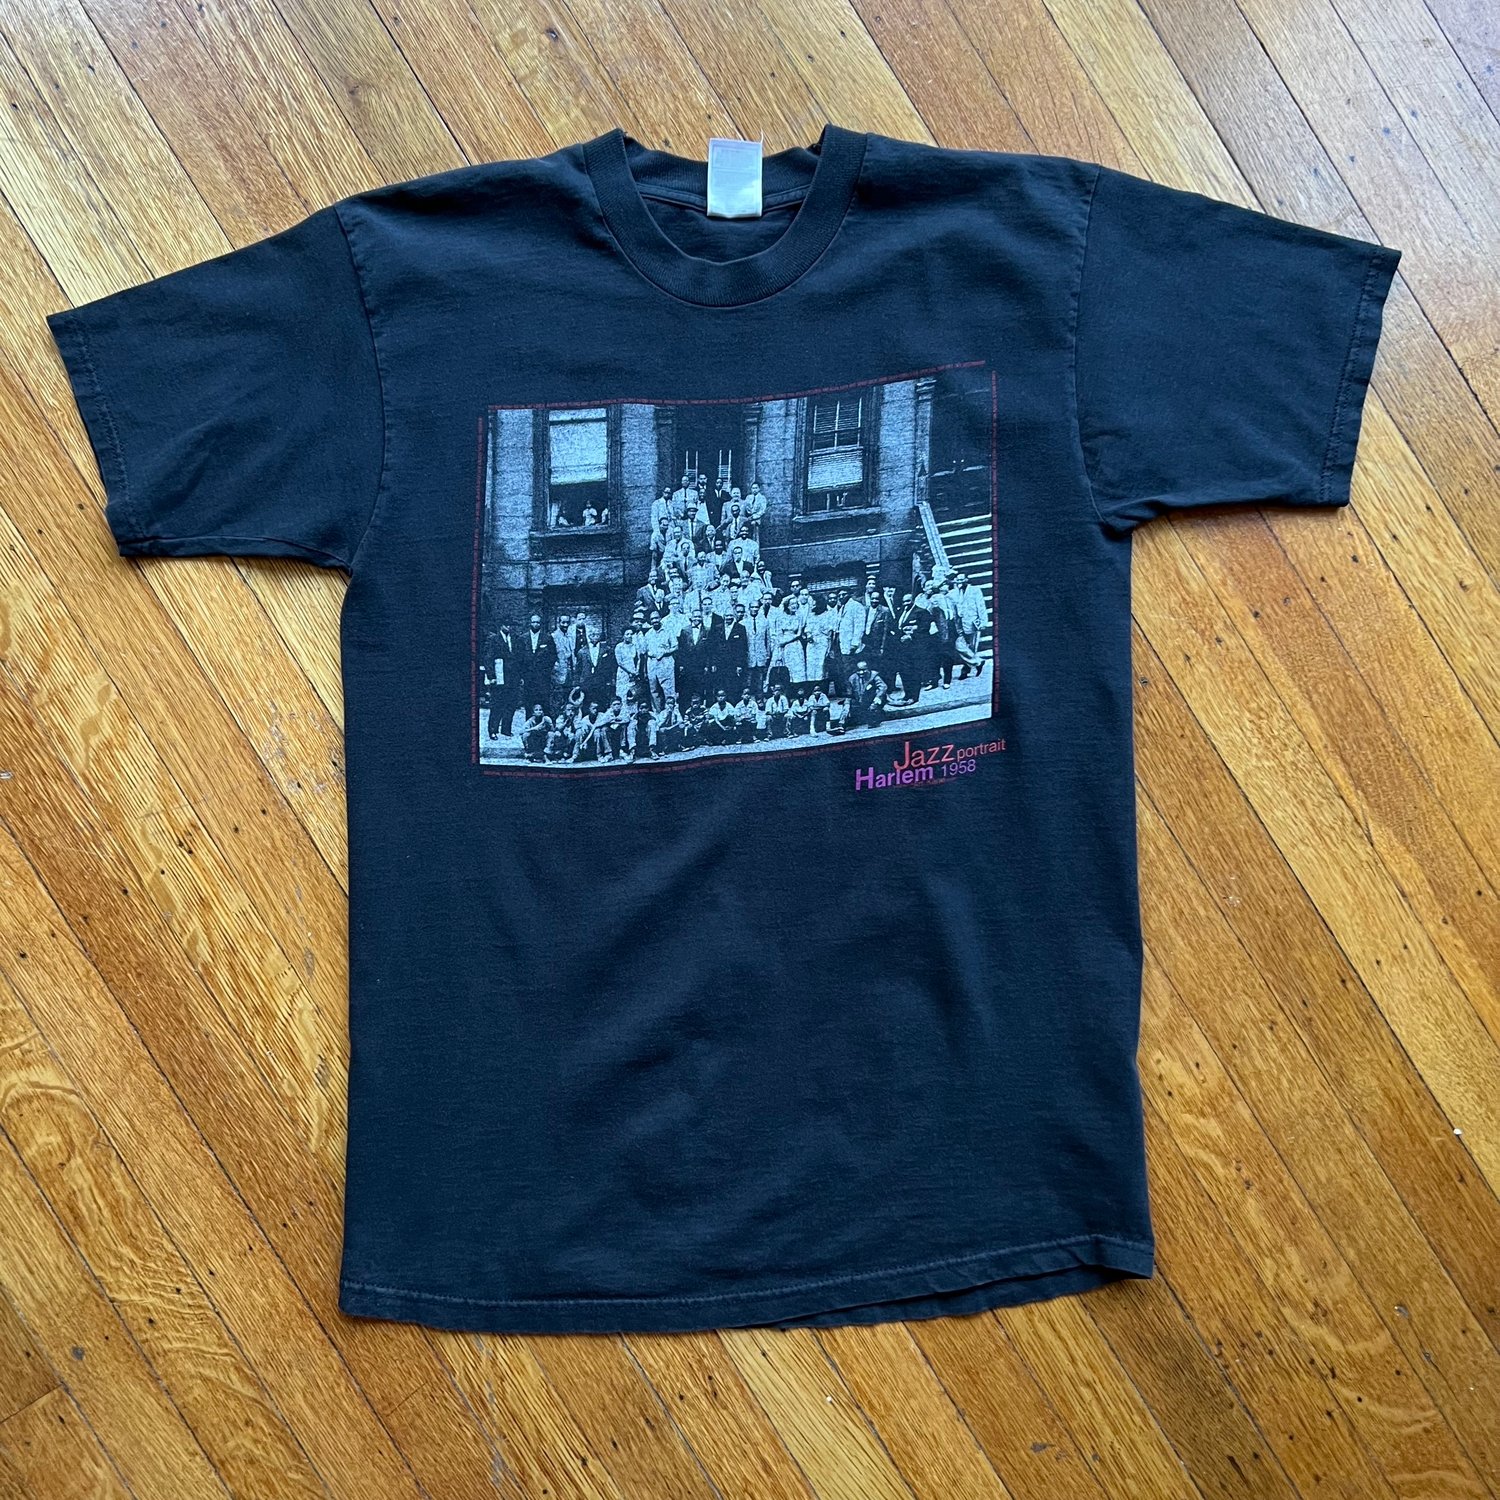 Art Kane 'A Great Day in Harlem' T-Shirt | Intramural